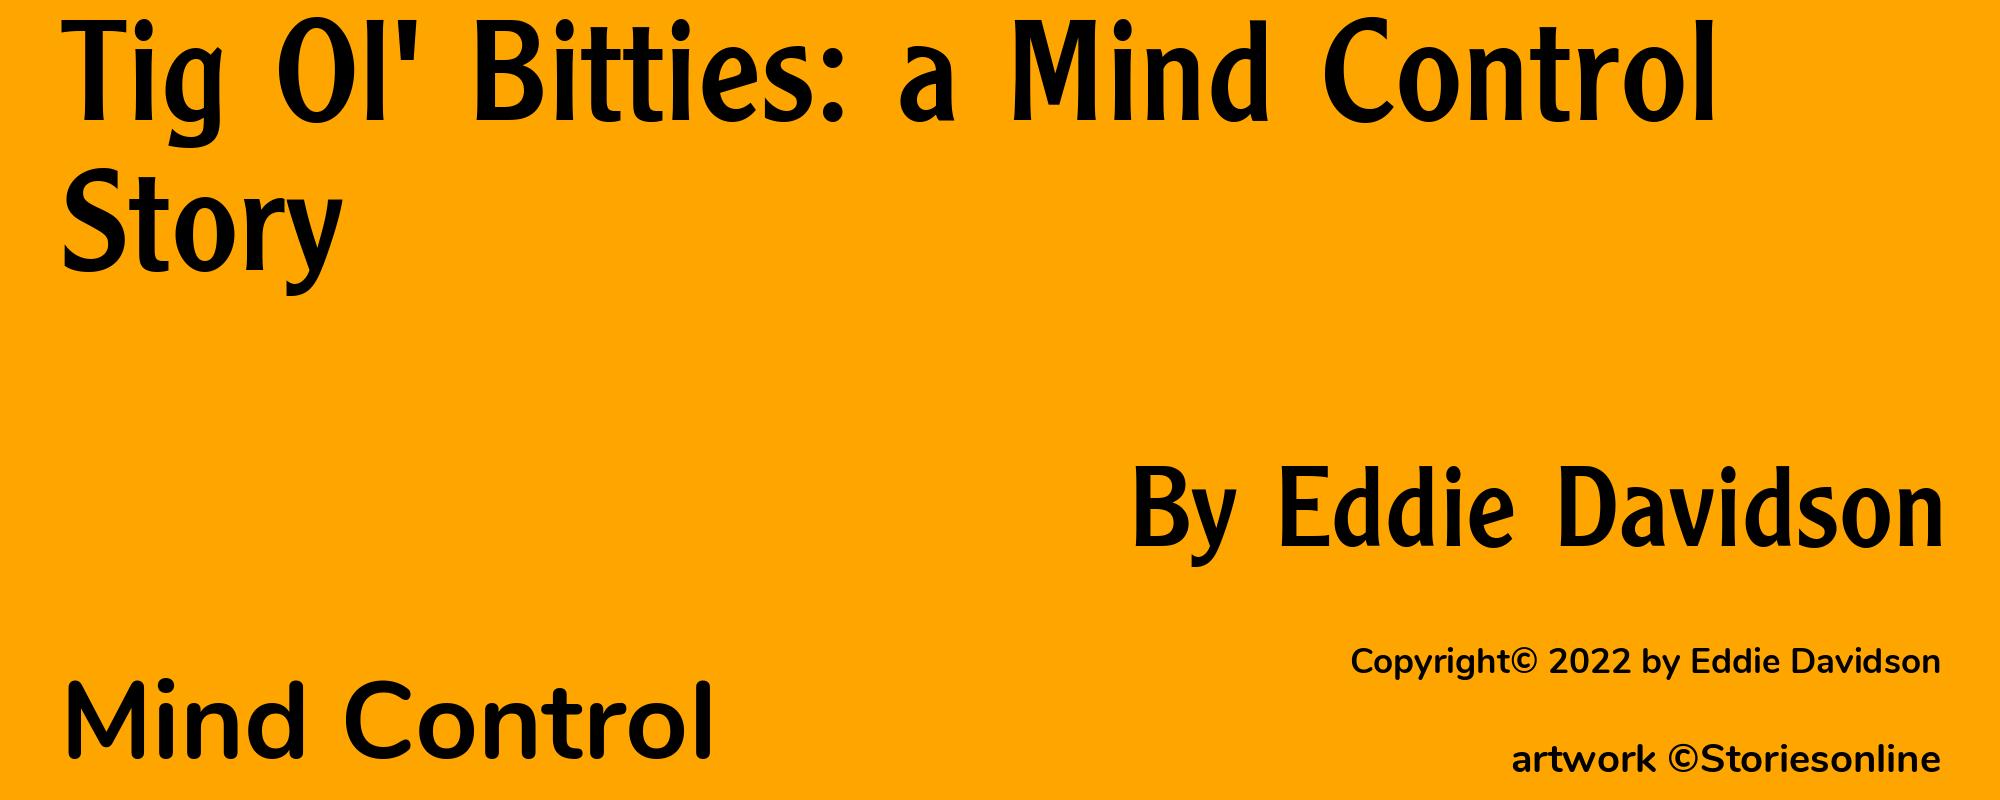 Tig Ol' Bitties: a Mind Control Story - Cover